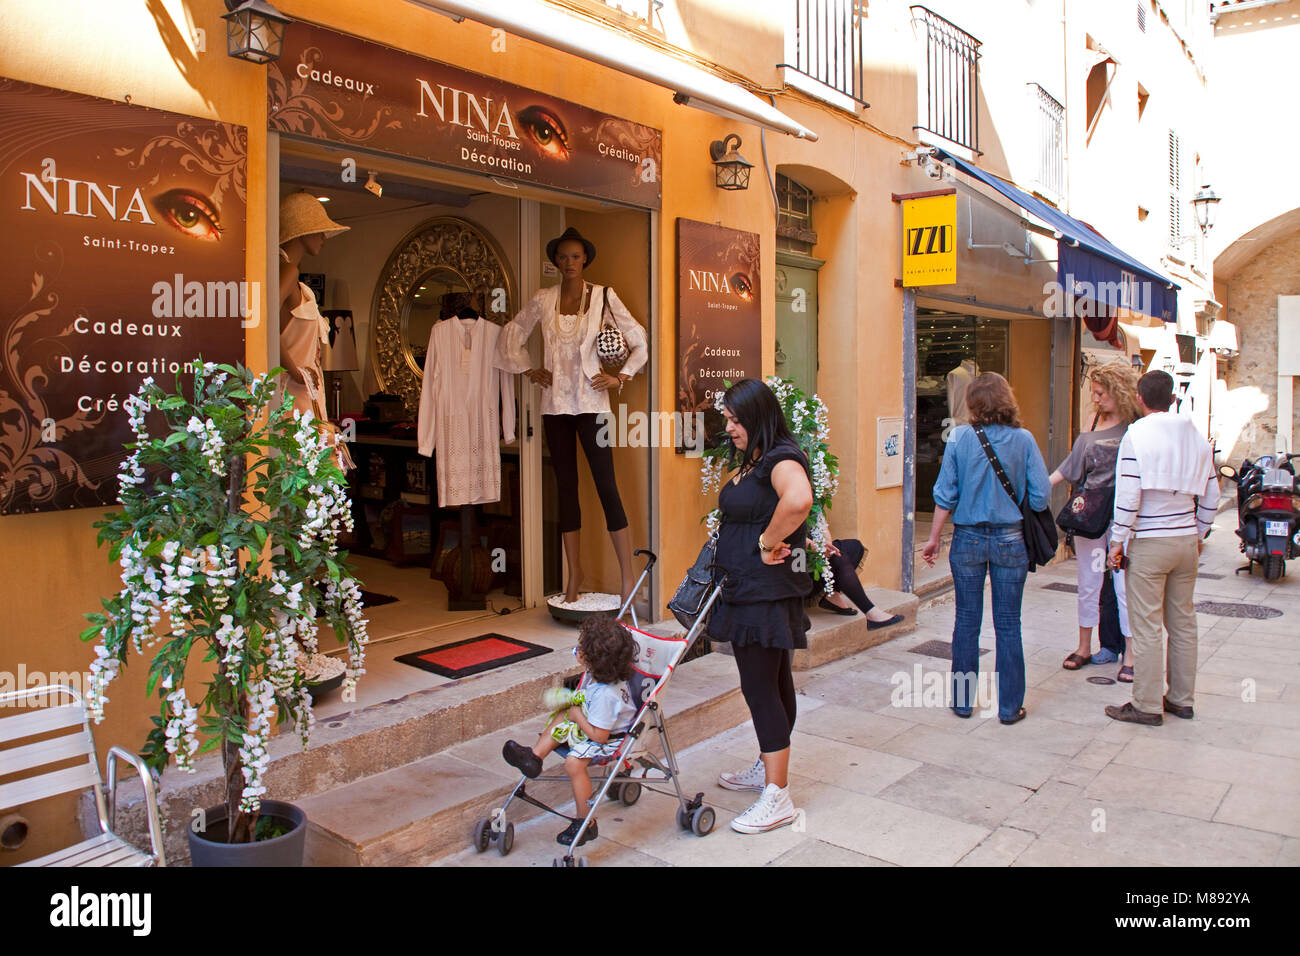 Fashion shop Nina at a alley, old town of Saint-Tropez, french riviera, South France, Cote d'Azur, France, Europe Stock Photo